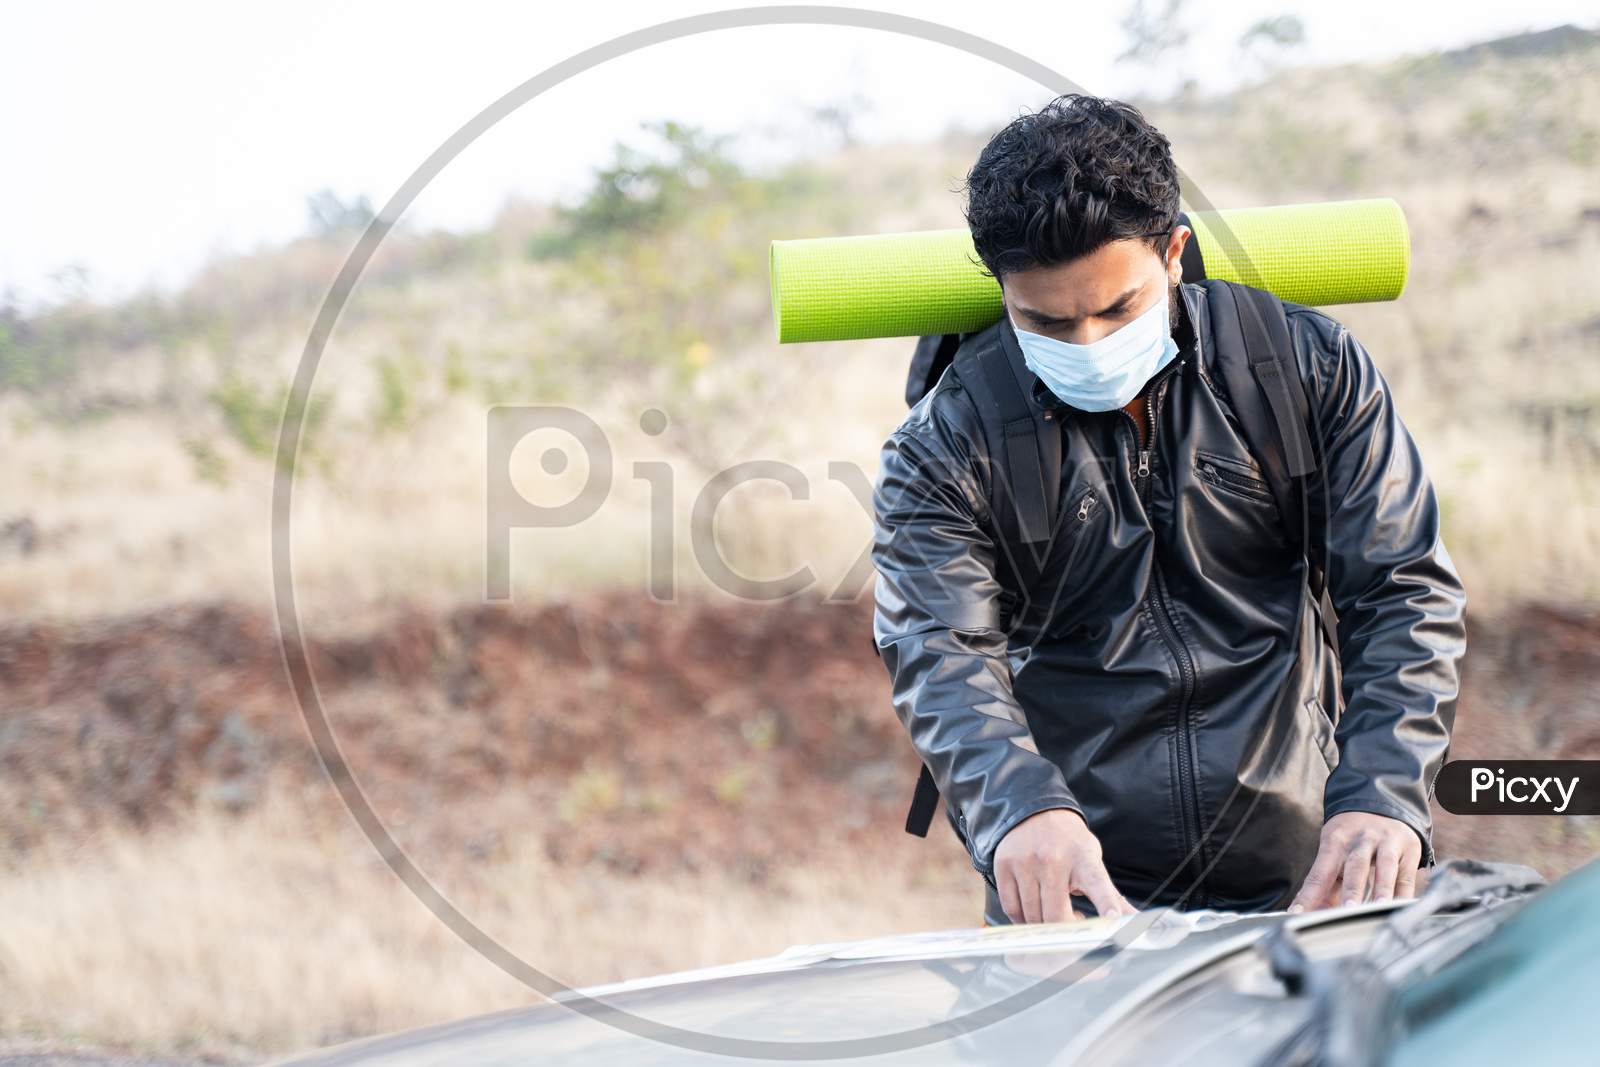 Young Man In Face Mask Busy Searching Or Checking Map On Car Before Starting The Hiking - Concept Of Solo Travel With Safety Measures Due To Coronavirus Covid-19 Pandemic.